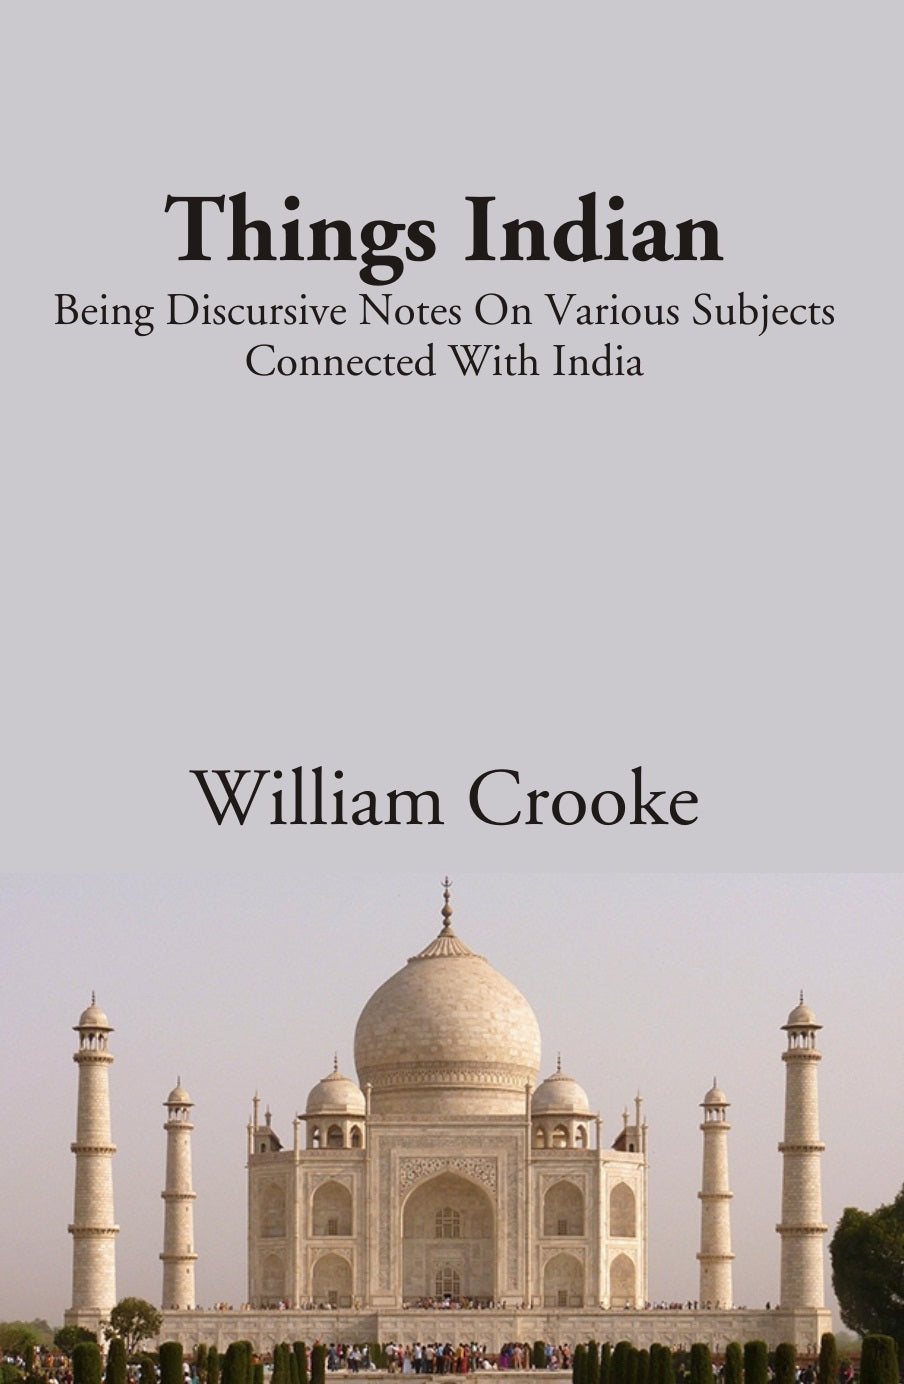 Things indian: Being Discursive Notes On Various Subjects Connected With India